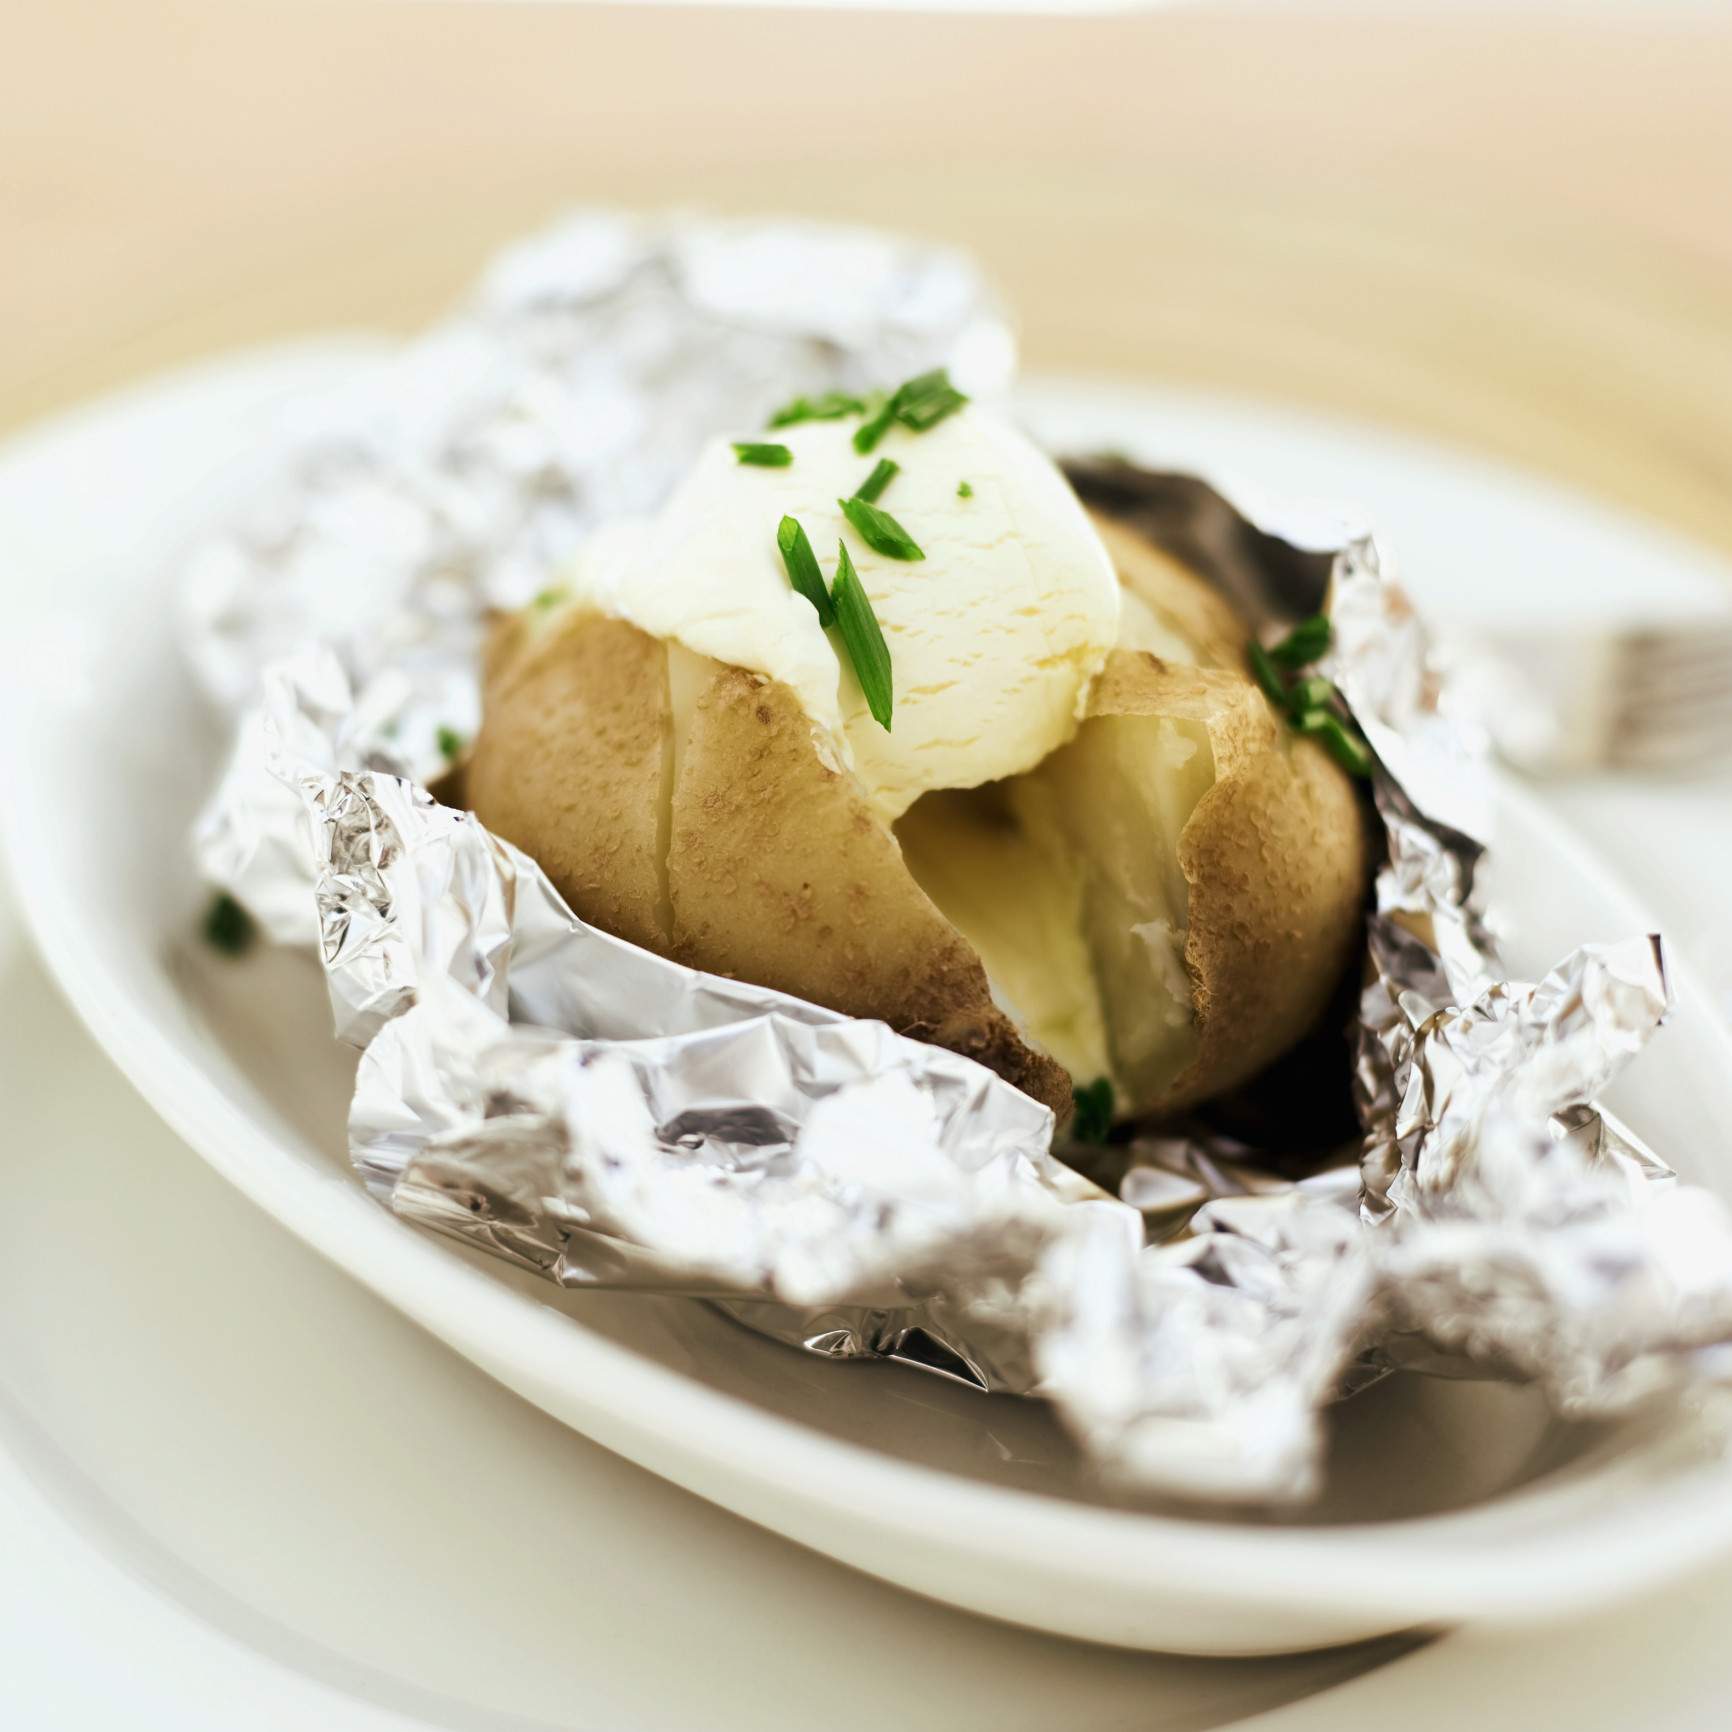 How Long To Bake A Potato At 425
 Cooking Time for Baked Potatoes Wrapped in Foil